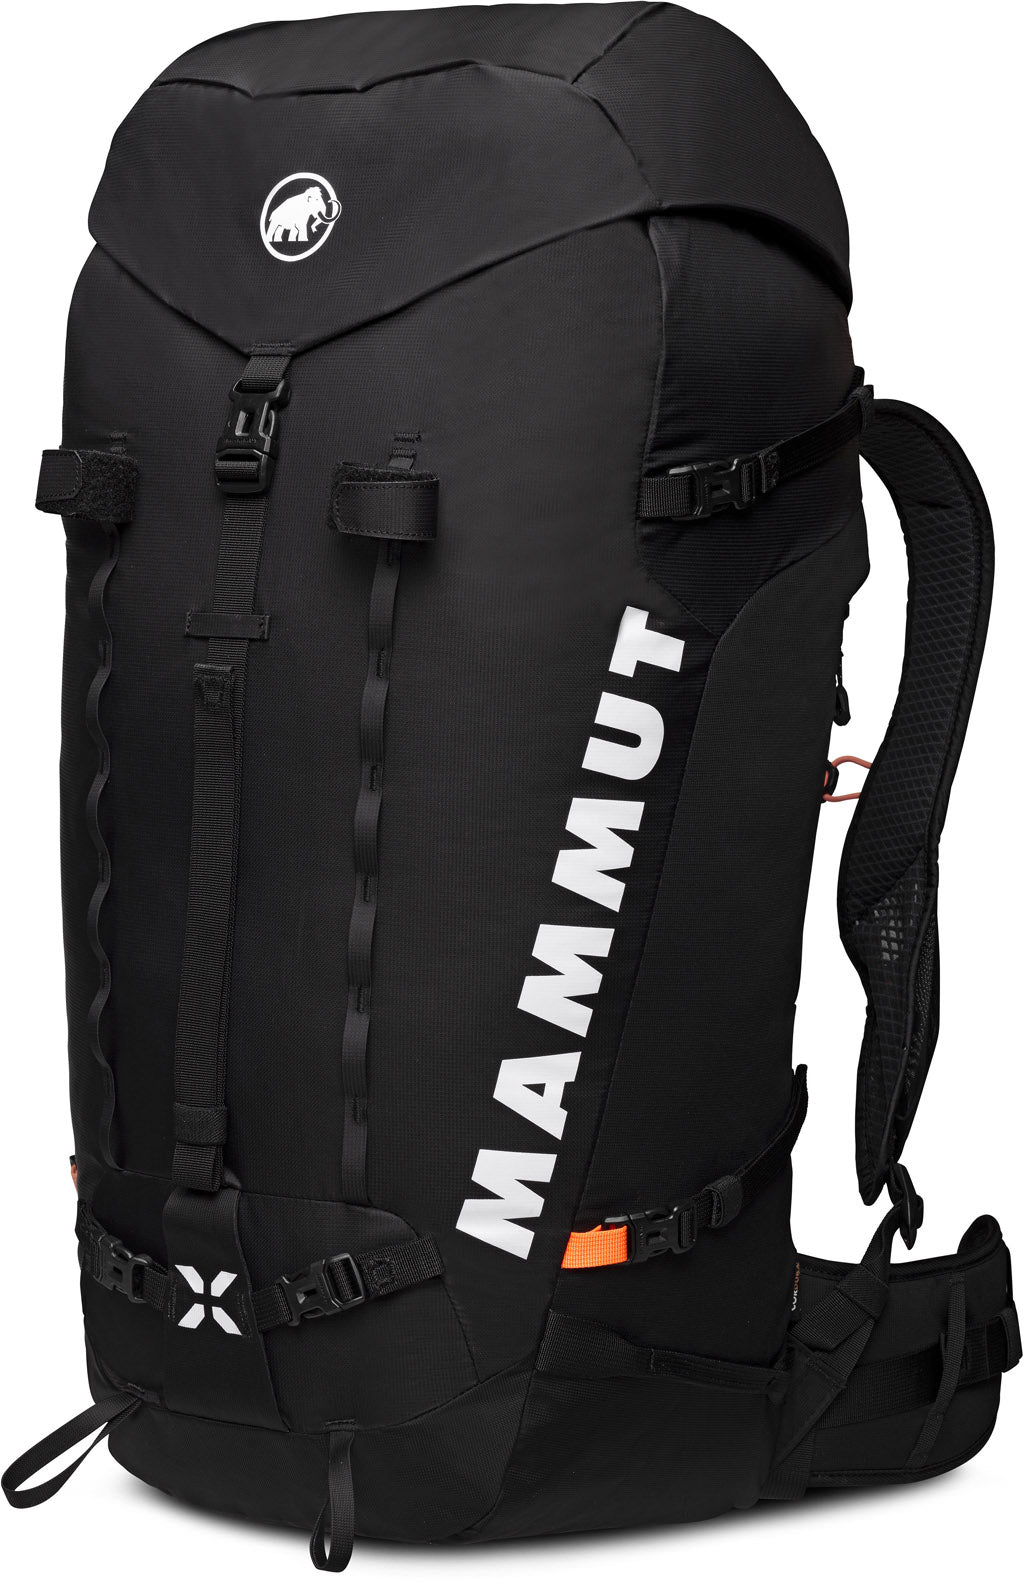 Mammut Trion Nordwand 38 Backpack - Unisex | Altitude Sports